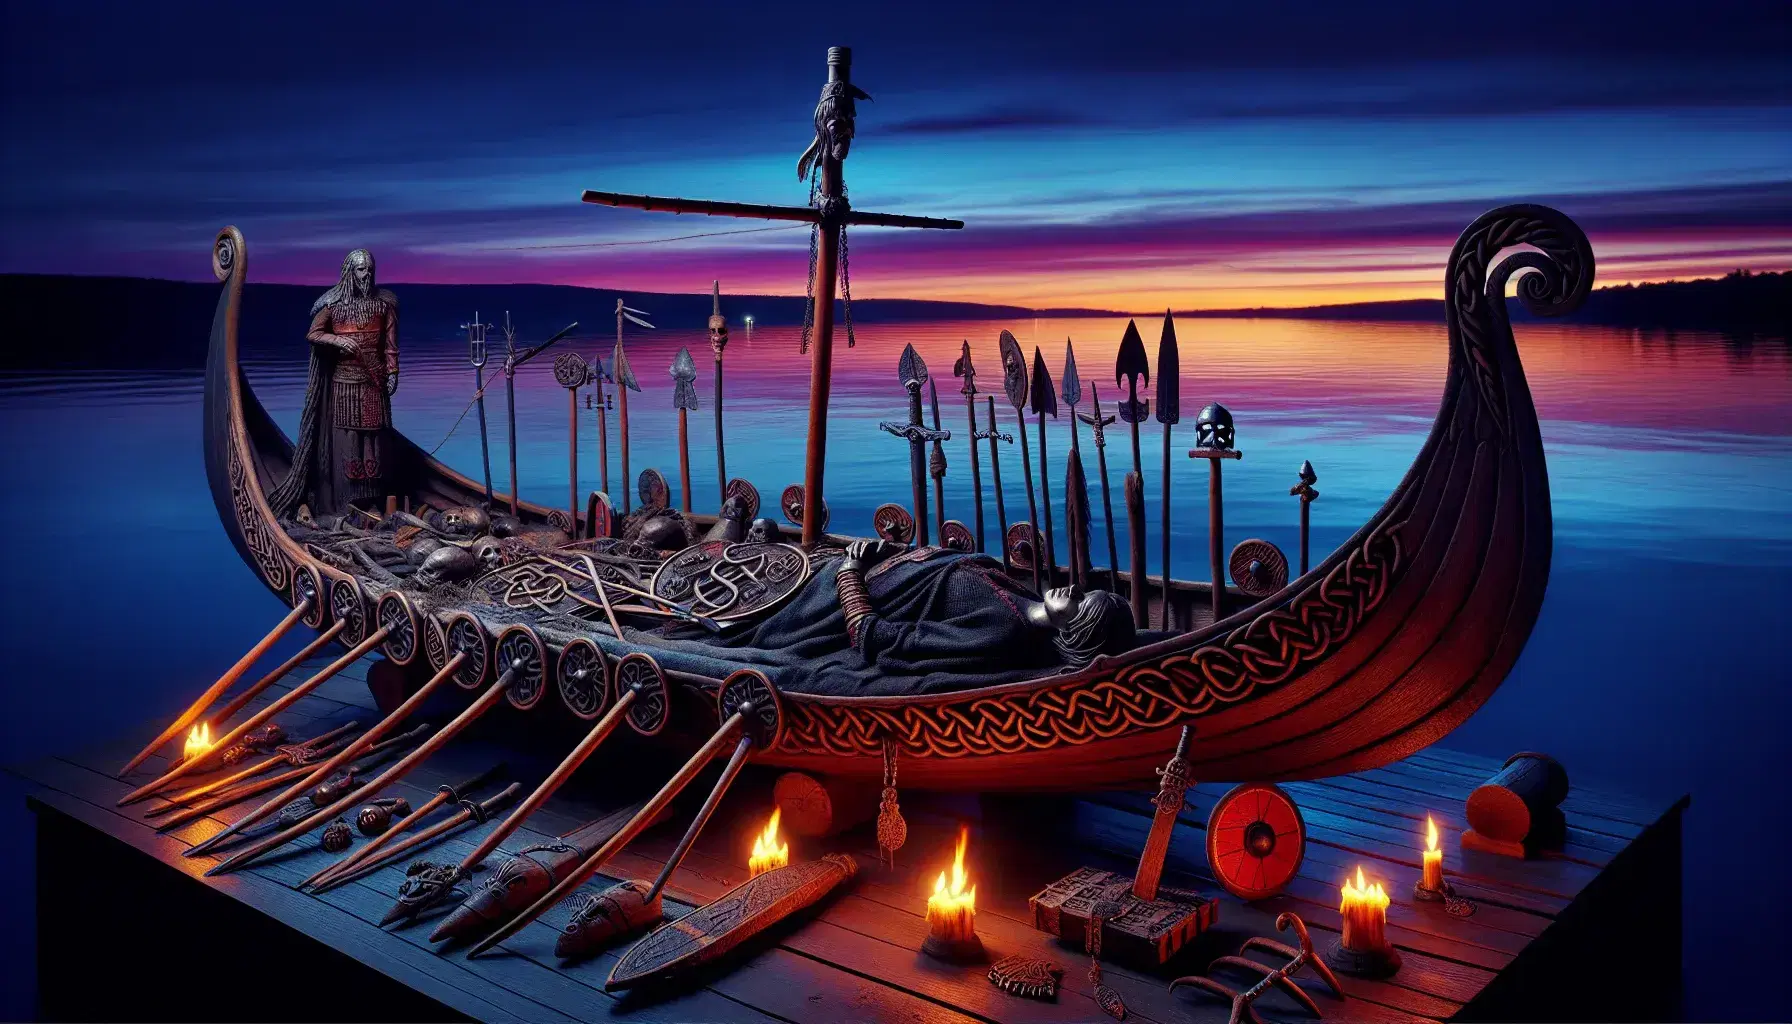 Viking funeral at dusk with a flaming longship on calm waters, surrounded by mourners in boats and a serene twilight sky reflecting the solemn scene.